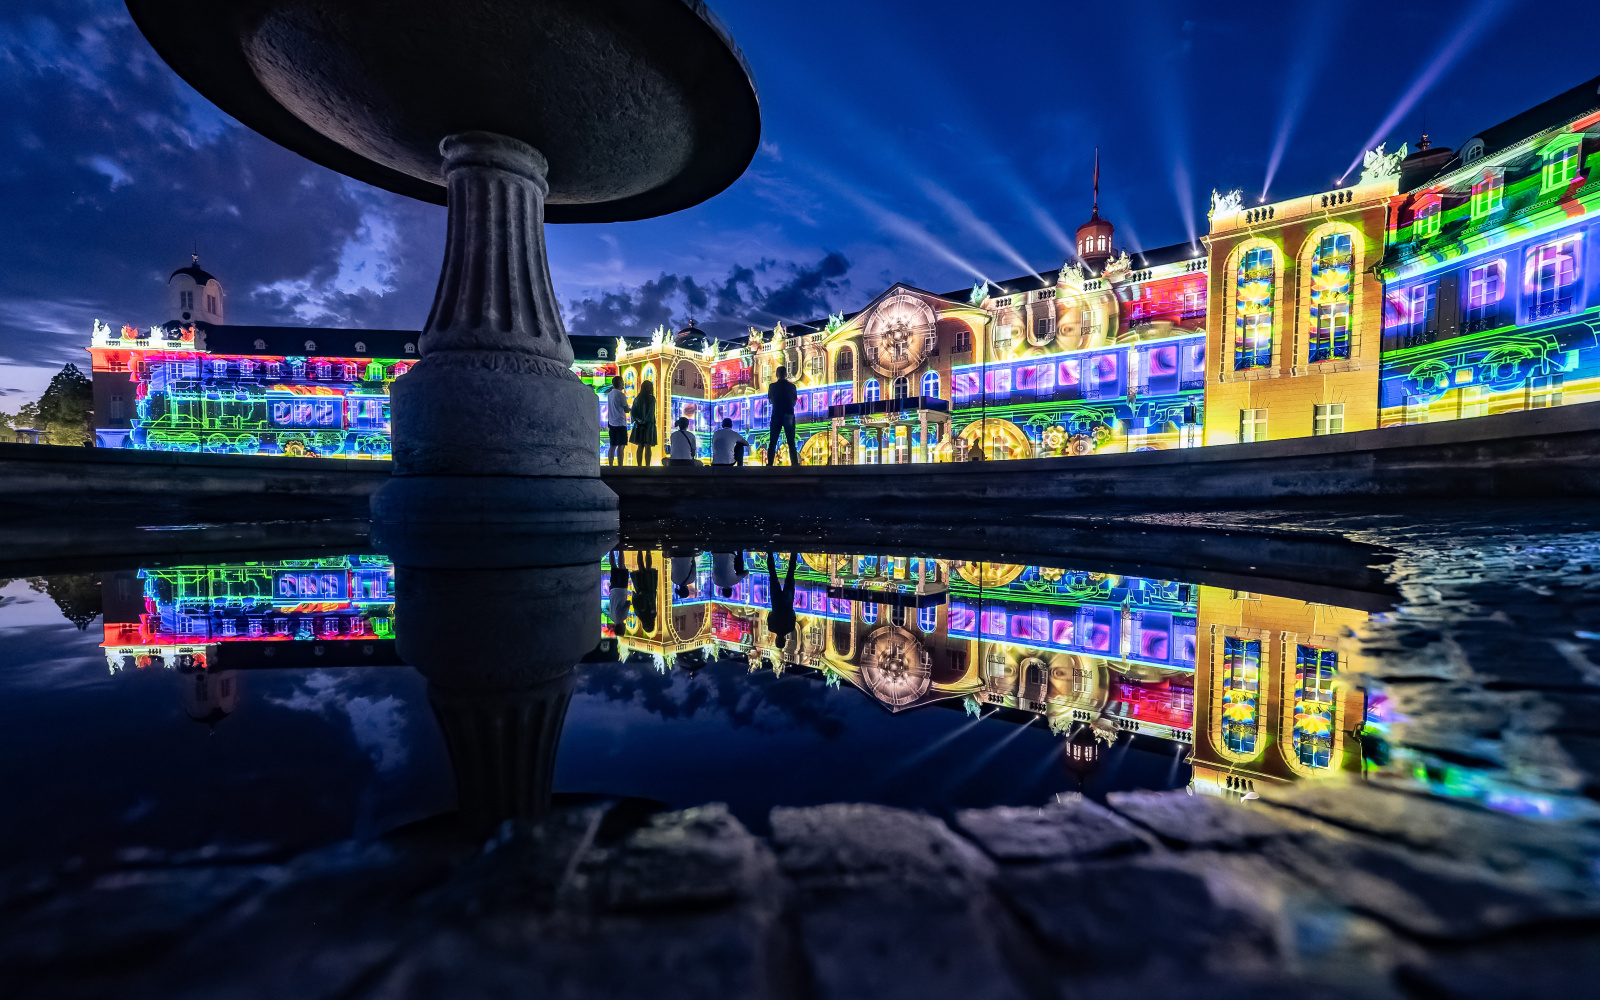 On view is the winning entry of the BBBank Award 2023 "BhinnekaExpress", 2023, The Fox, The Folks (Indonesia). The fountain in front of the castle can be seen in the foreground and the colourful facade of the castle in the background.